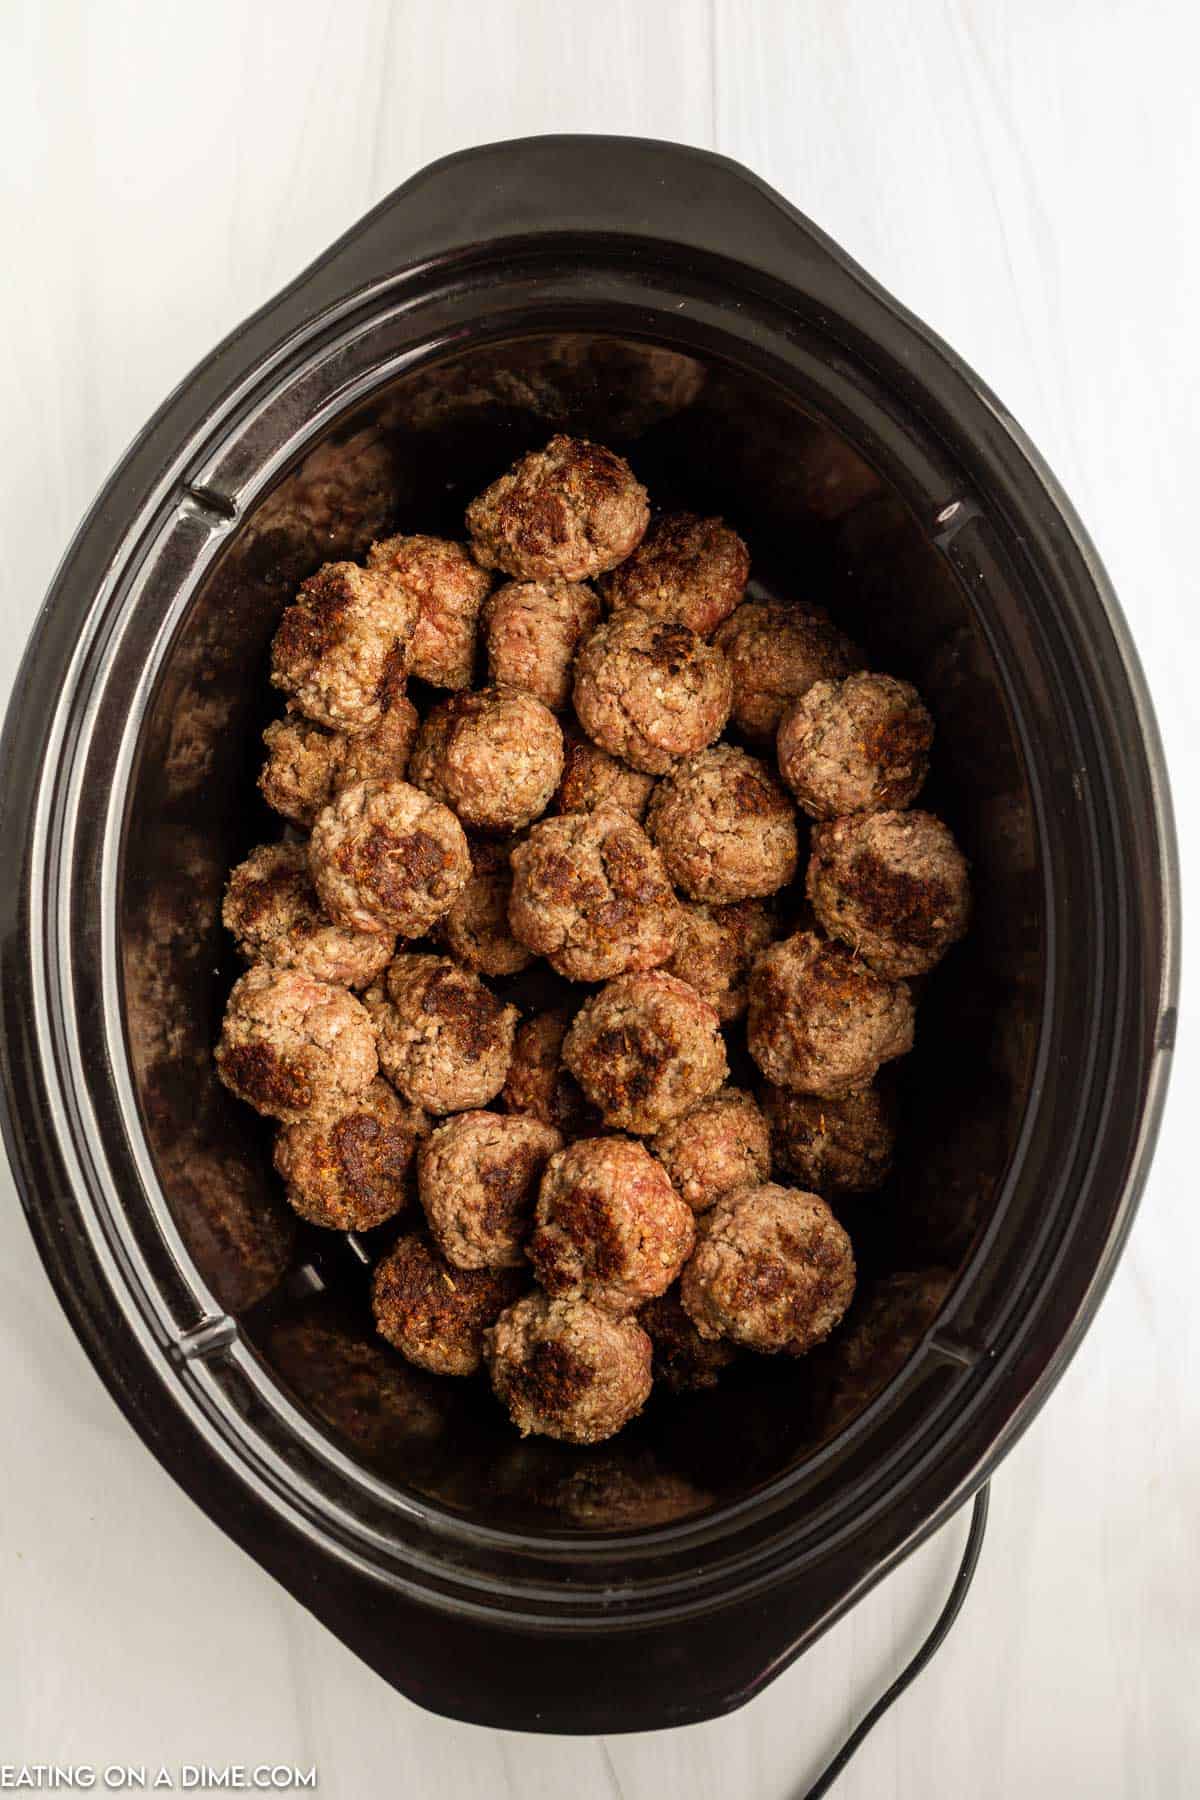 Cooked meat balls in a slow cooker